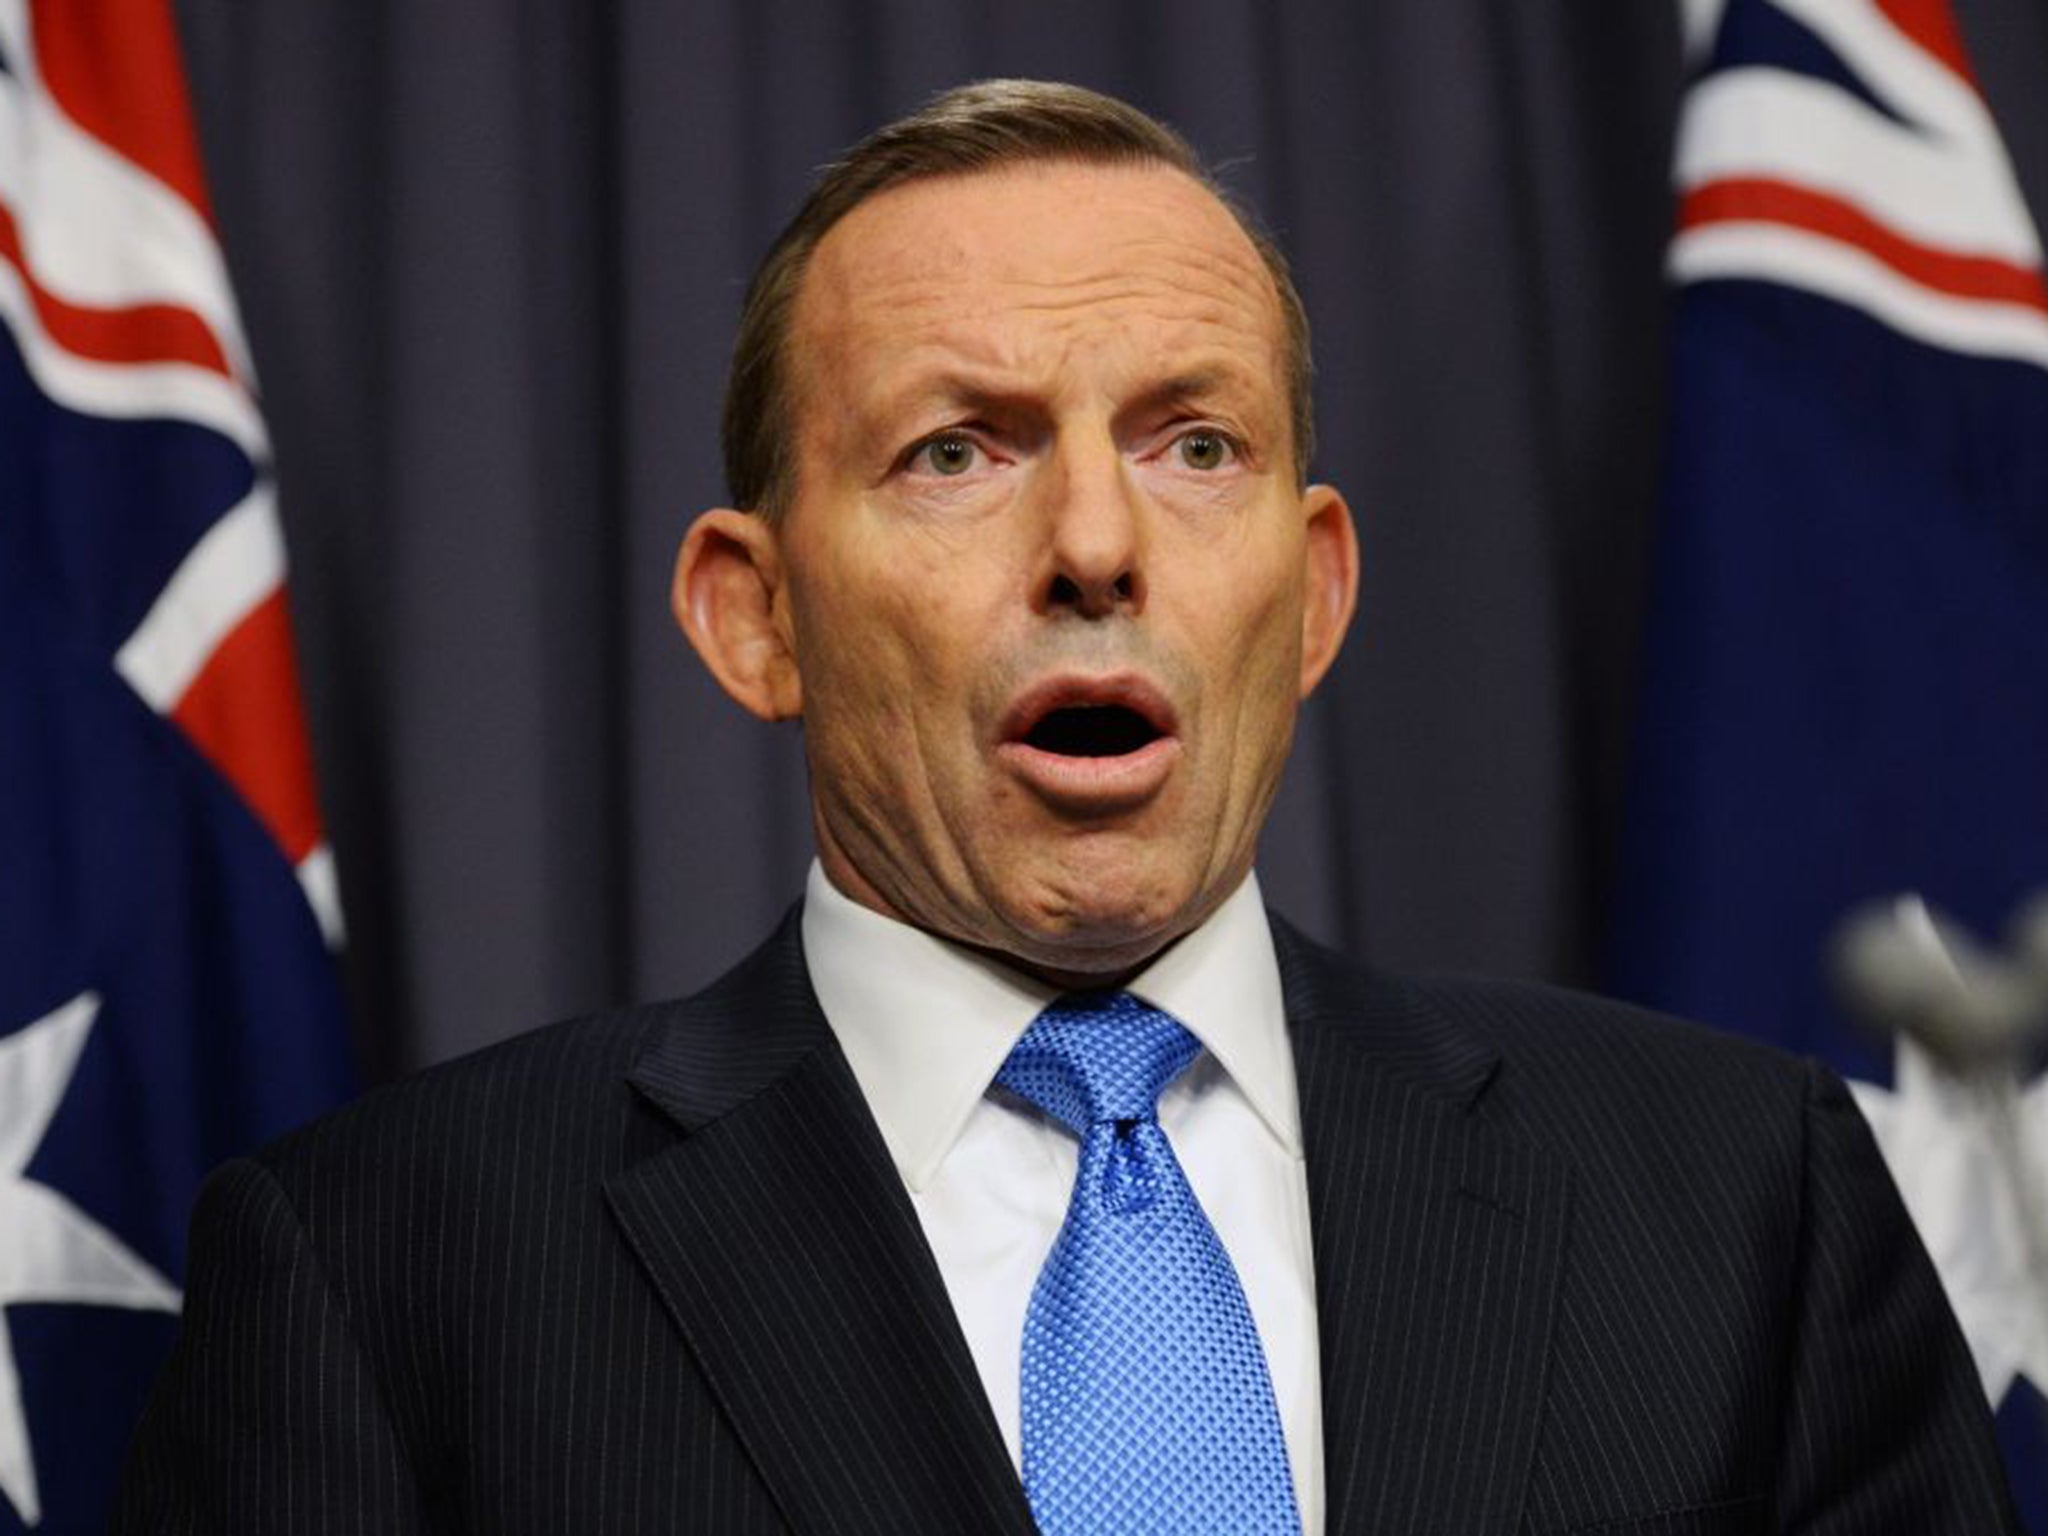 Tony Abbott wrote calling for reformation within Islam